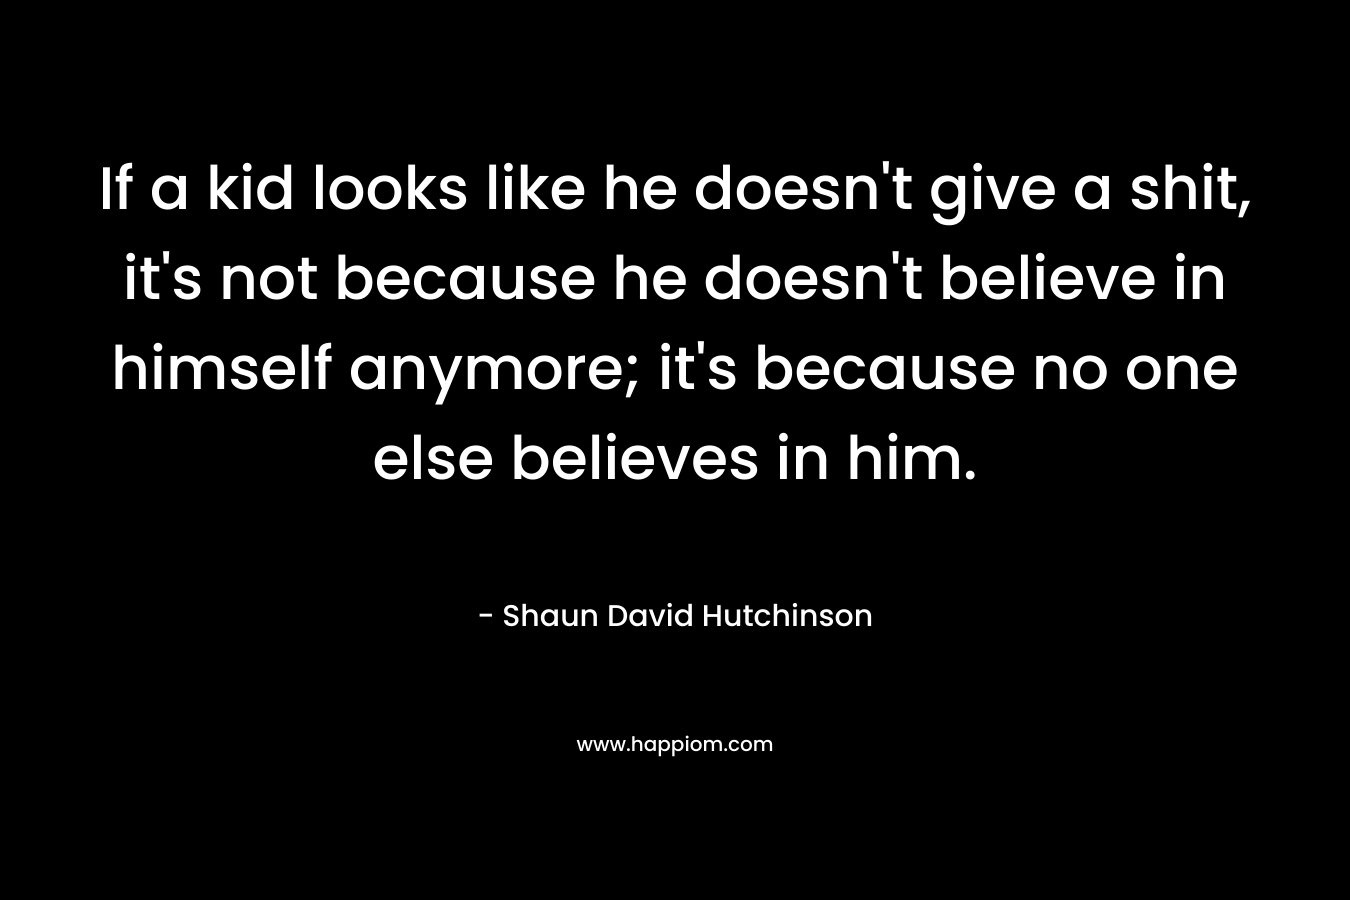 If a kid looks like he doesn't give a shit, it's not because he doesn't believe in himself anymore; it's because no one else believes in him.